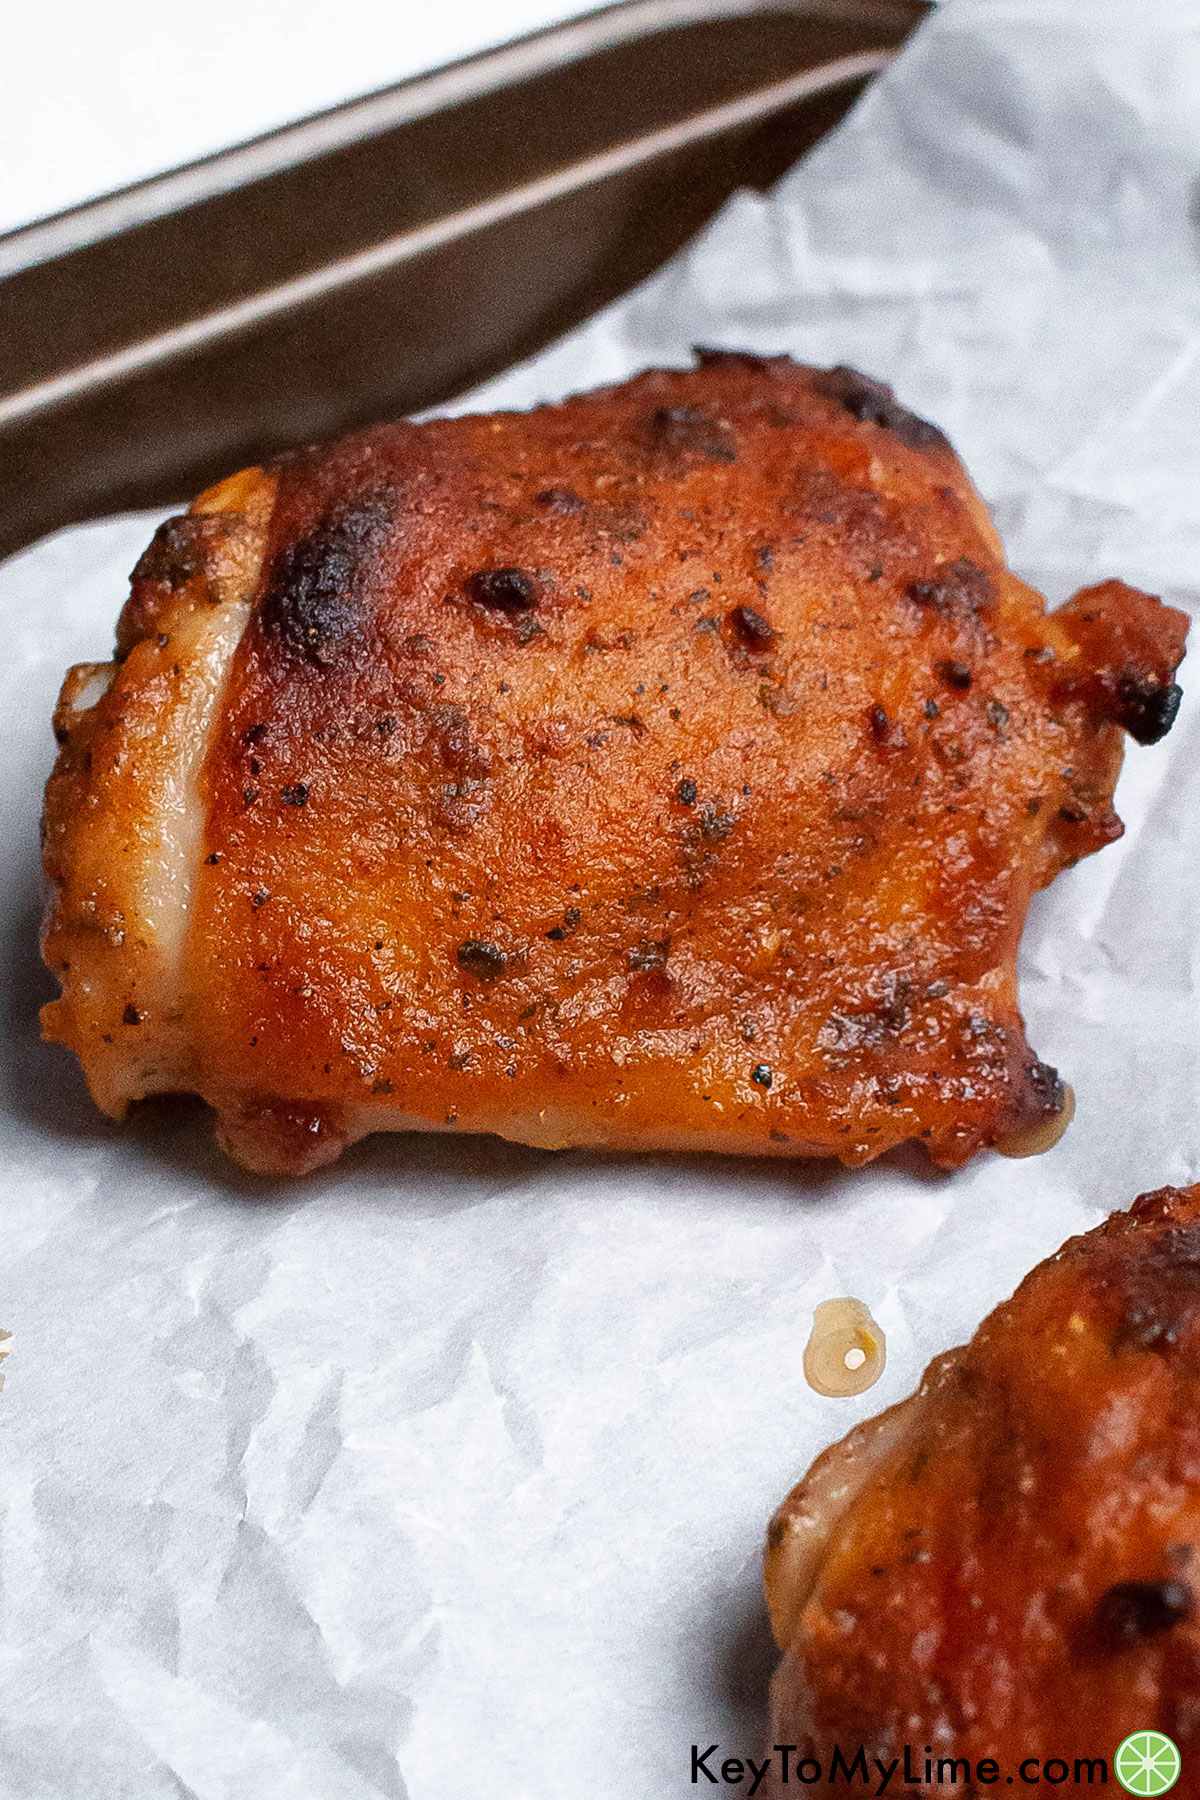 A serving of a couple chicken thighs fully cooked on parchment paper.